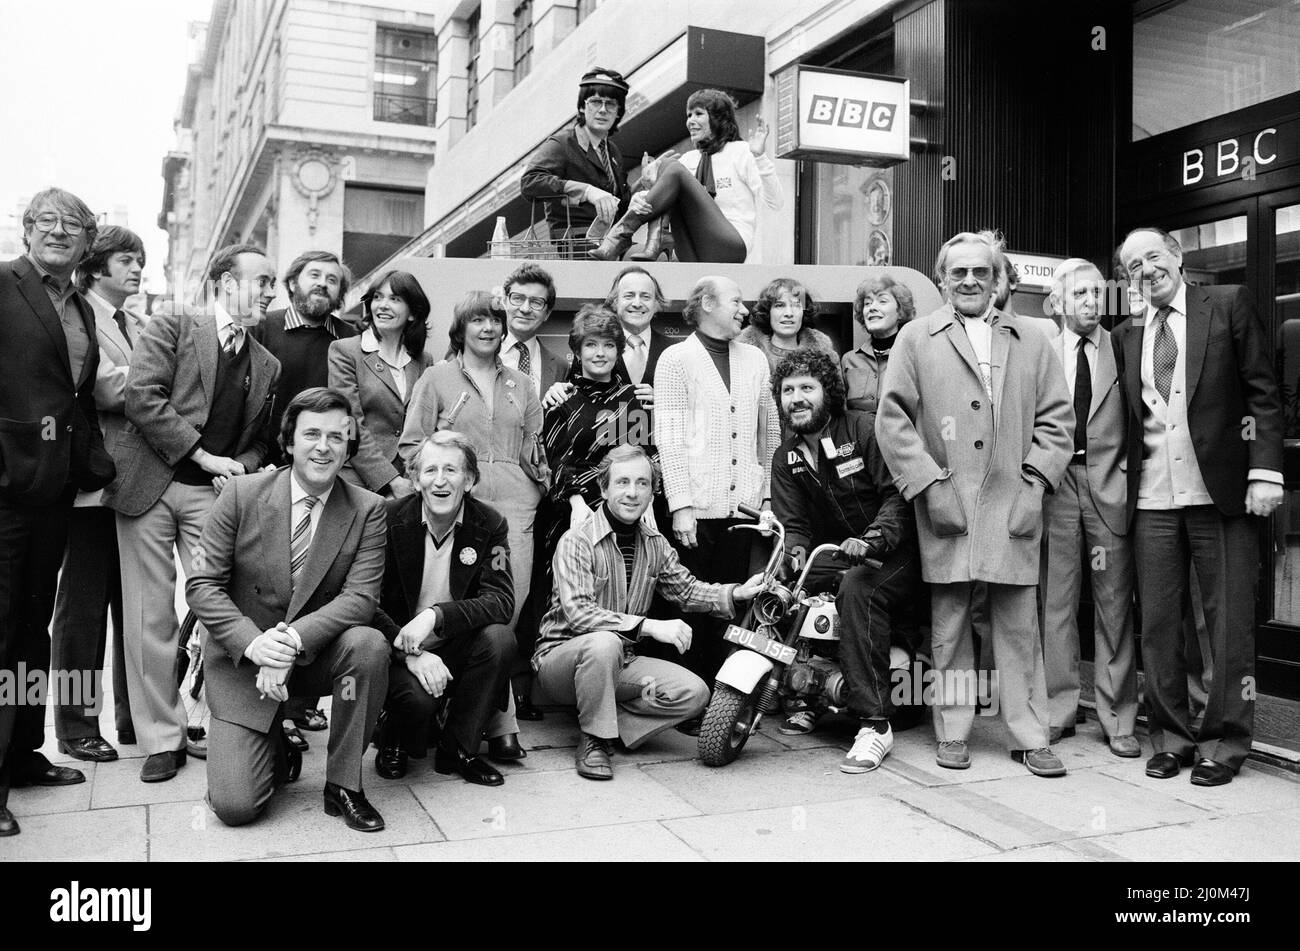 Photo-call with talent who will be appearing in BBC Radio Productions in 1981. Paris Studio, Lower Regent Street, London, 6th January 1981. DJ's pictured includes, Terry Wogan, Dave Lee Travis, Mike Reid & Judy Carne. Stock Photo